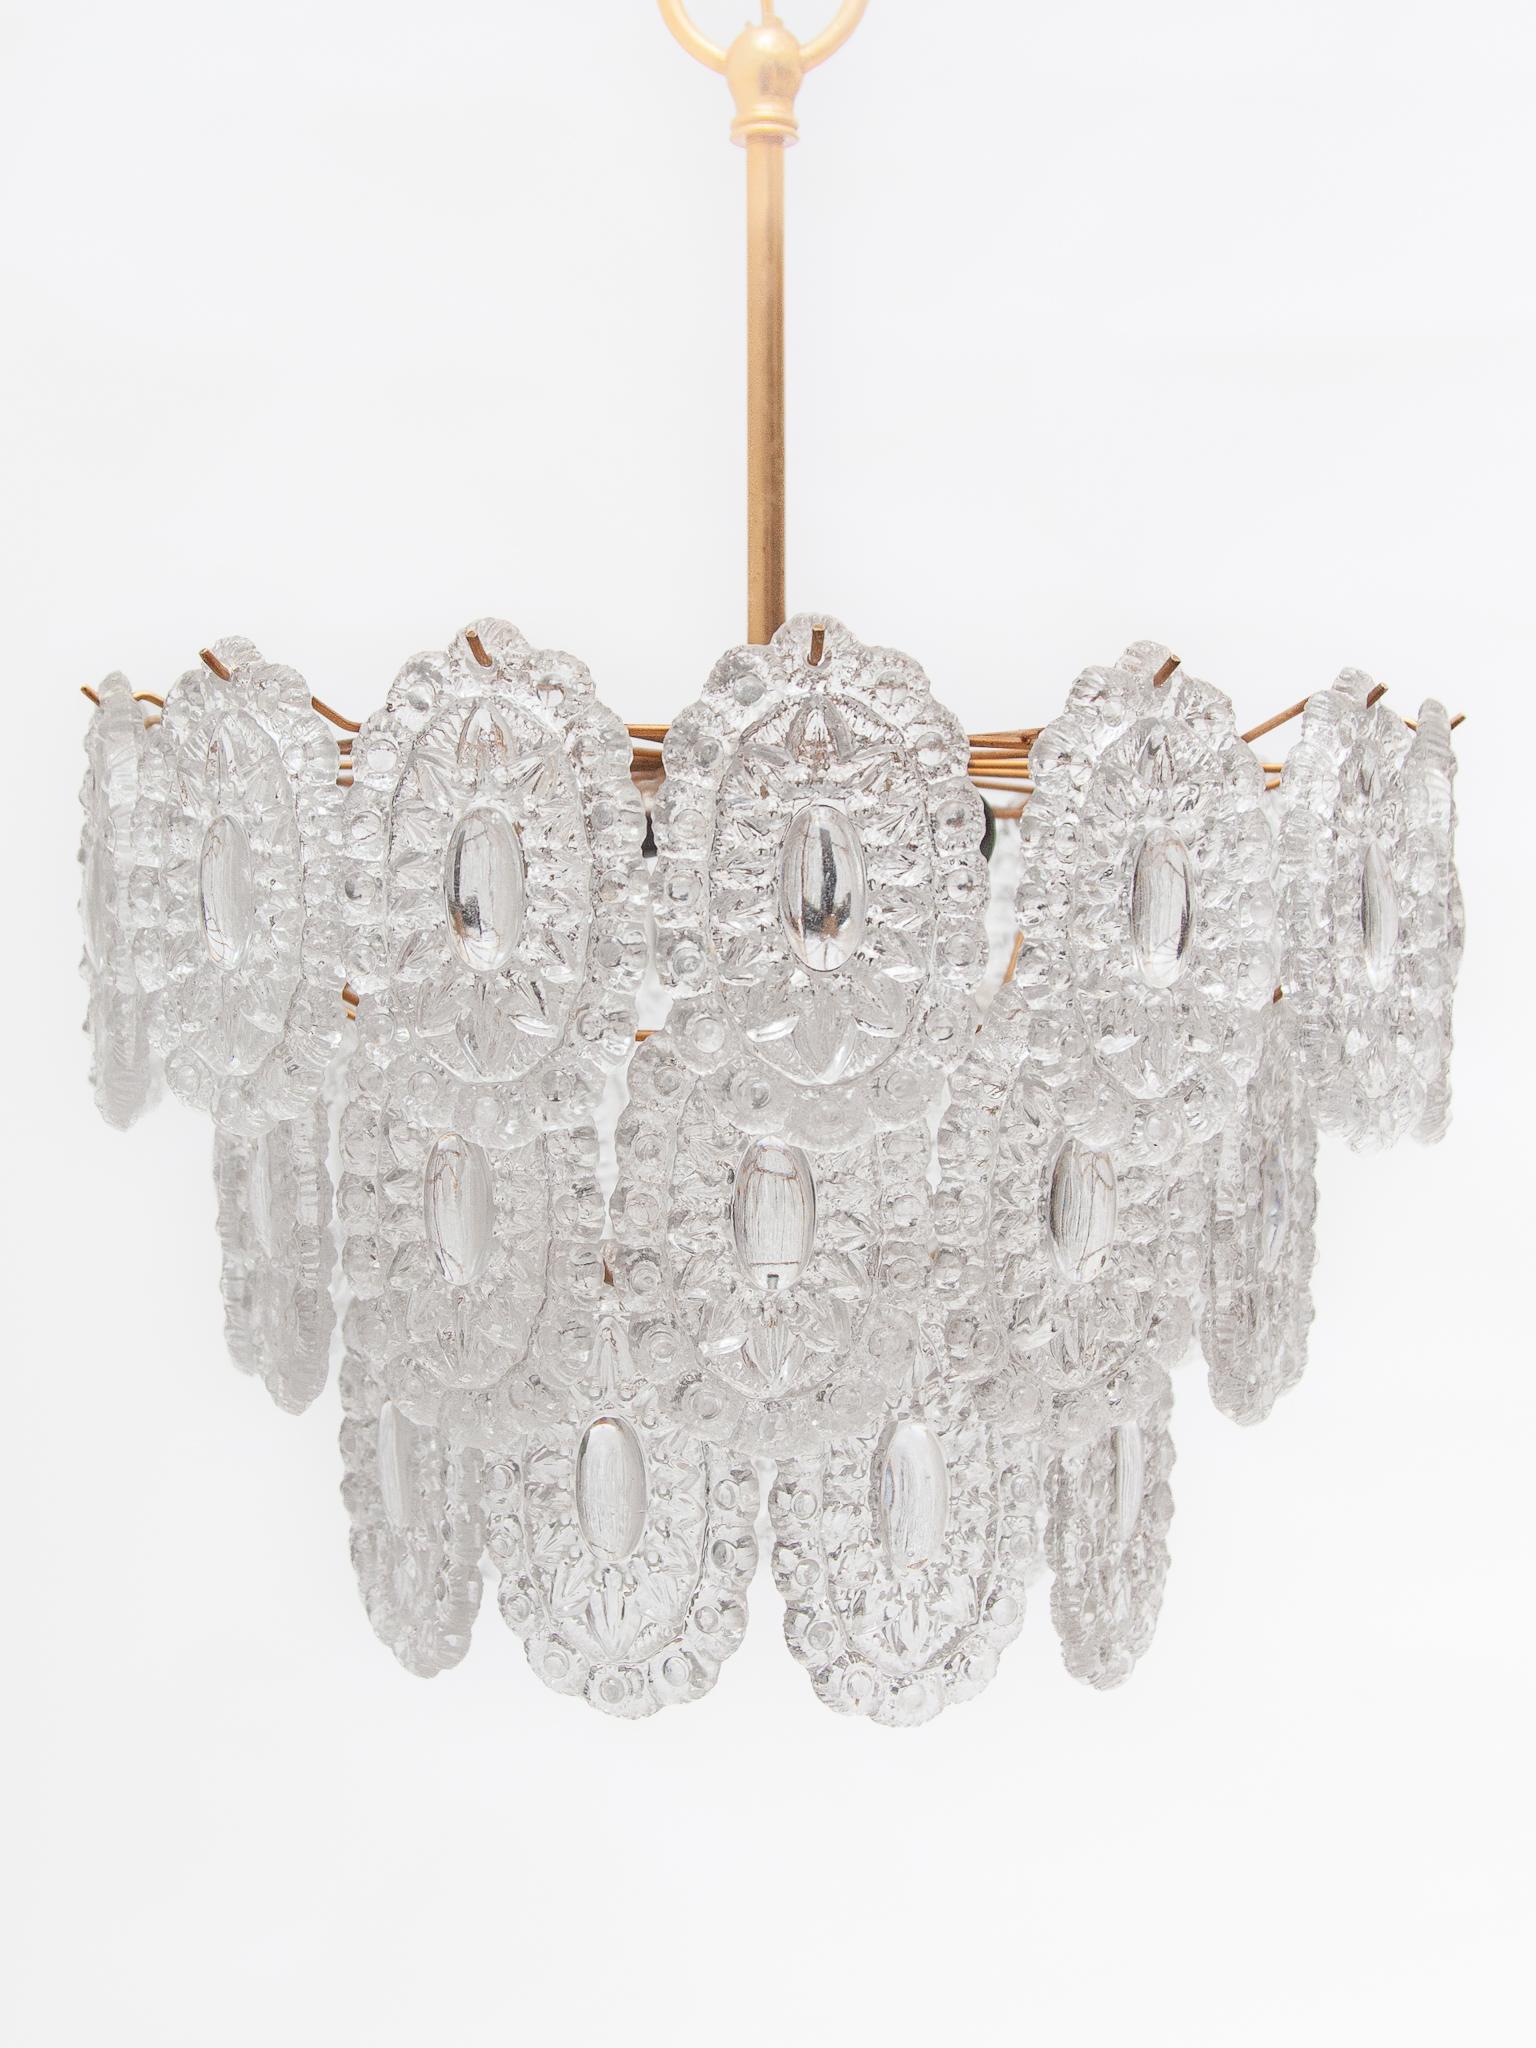 Massive Rosette Crystal Glass Chandelier, 1970s Belgium In Good Condition For Sale In Antwerp, BE